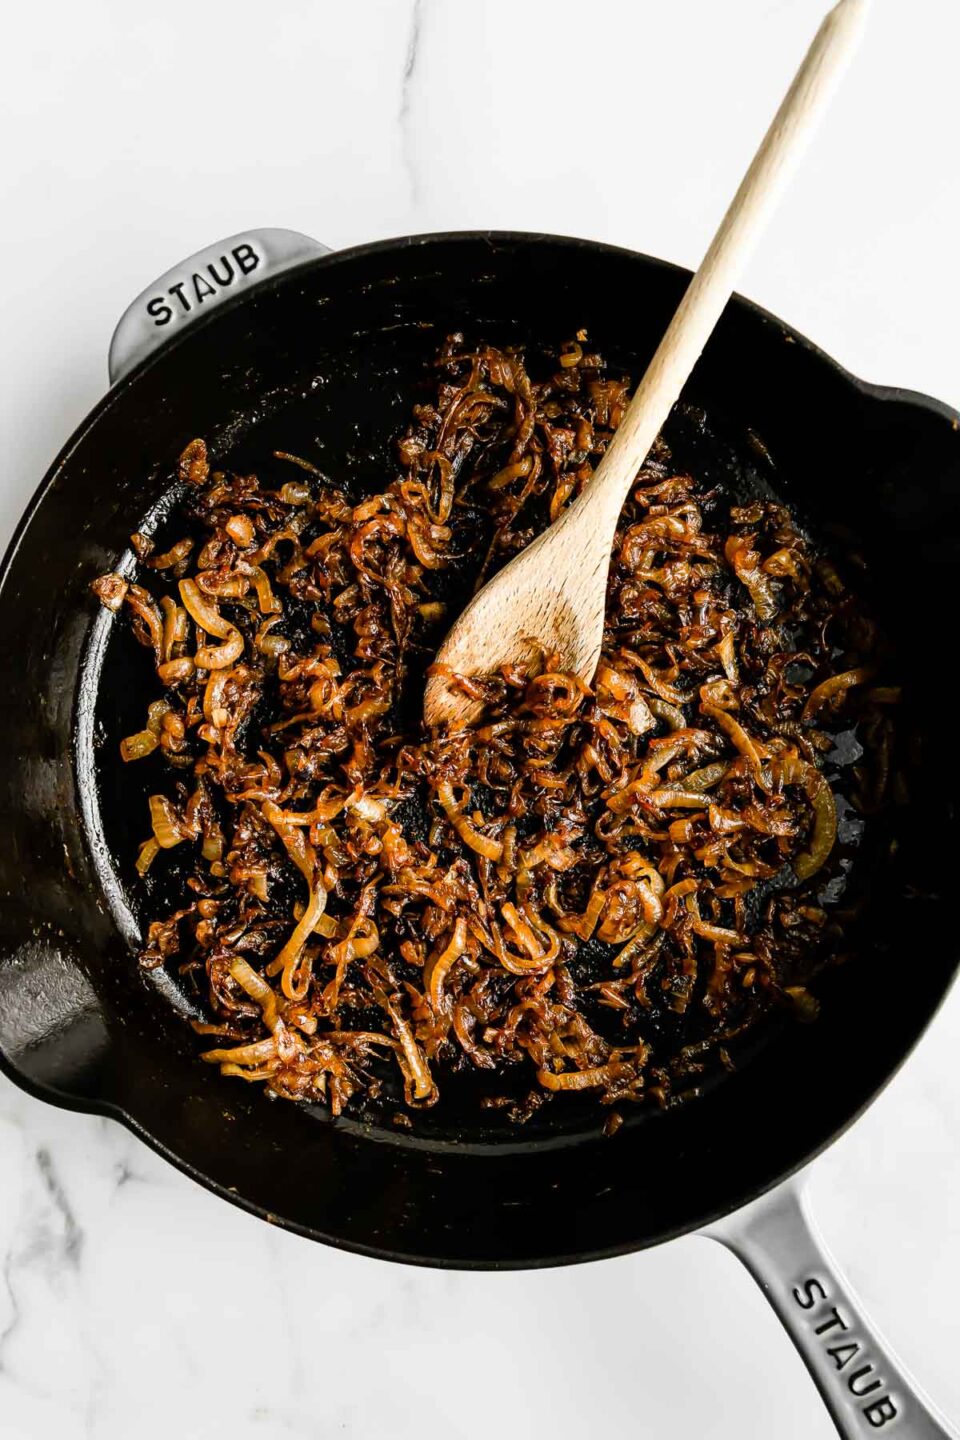 Caramelized sweet onions fill a large gray Staub cast iron skillet that sits atop a white and gray marble surface. A wooden spoon rests inside of the skillet for stirring.